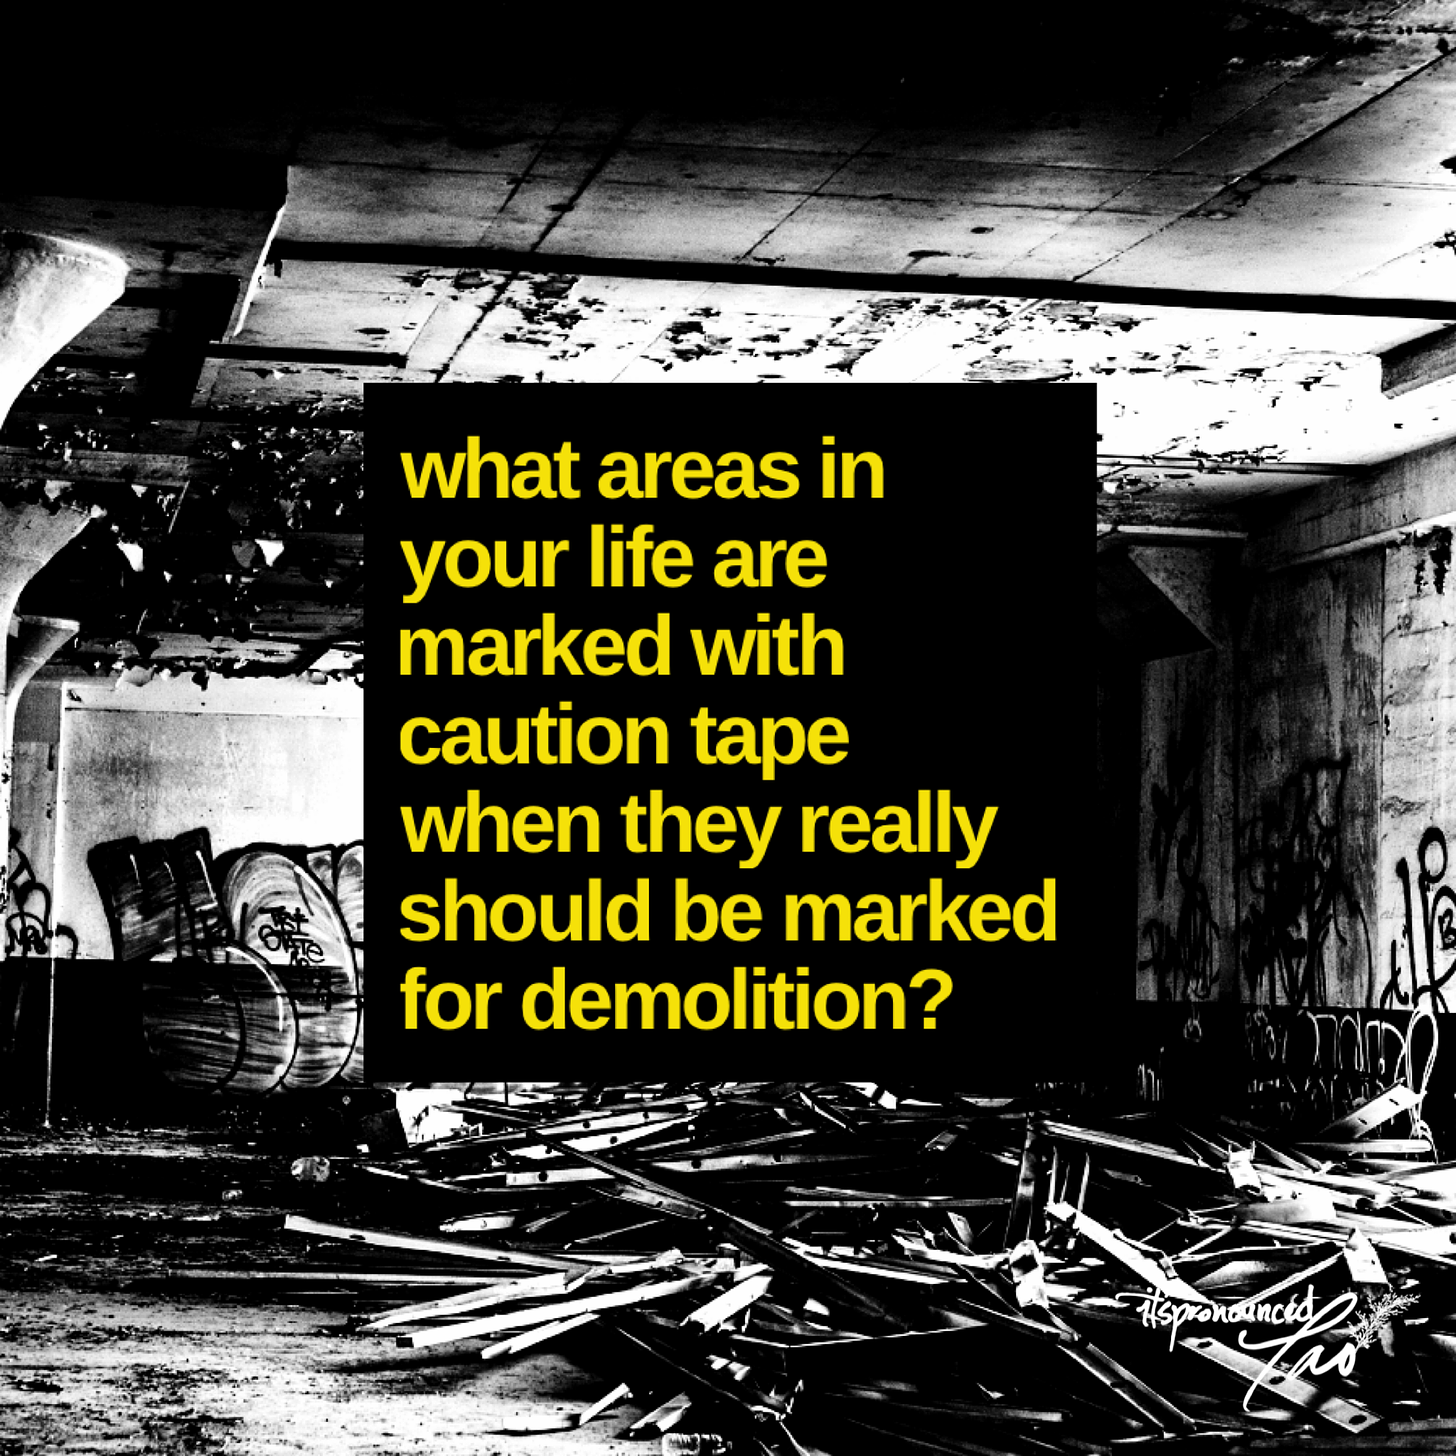 What areas in your life are marked with caution tape when they really should be marked for demolition?